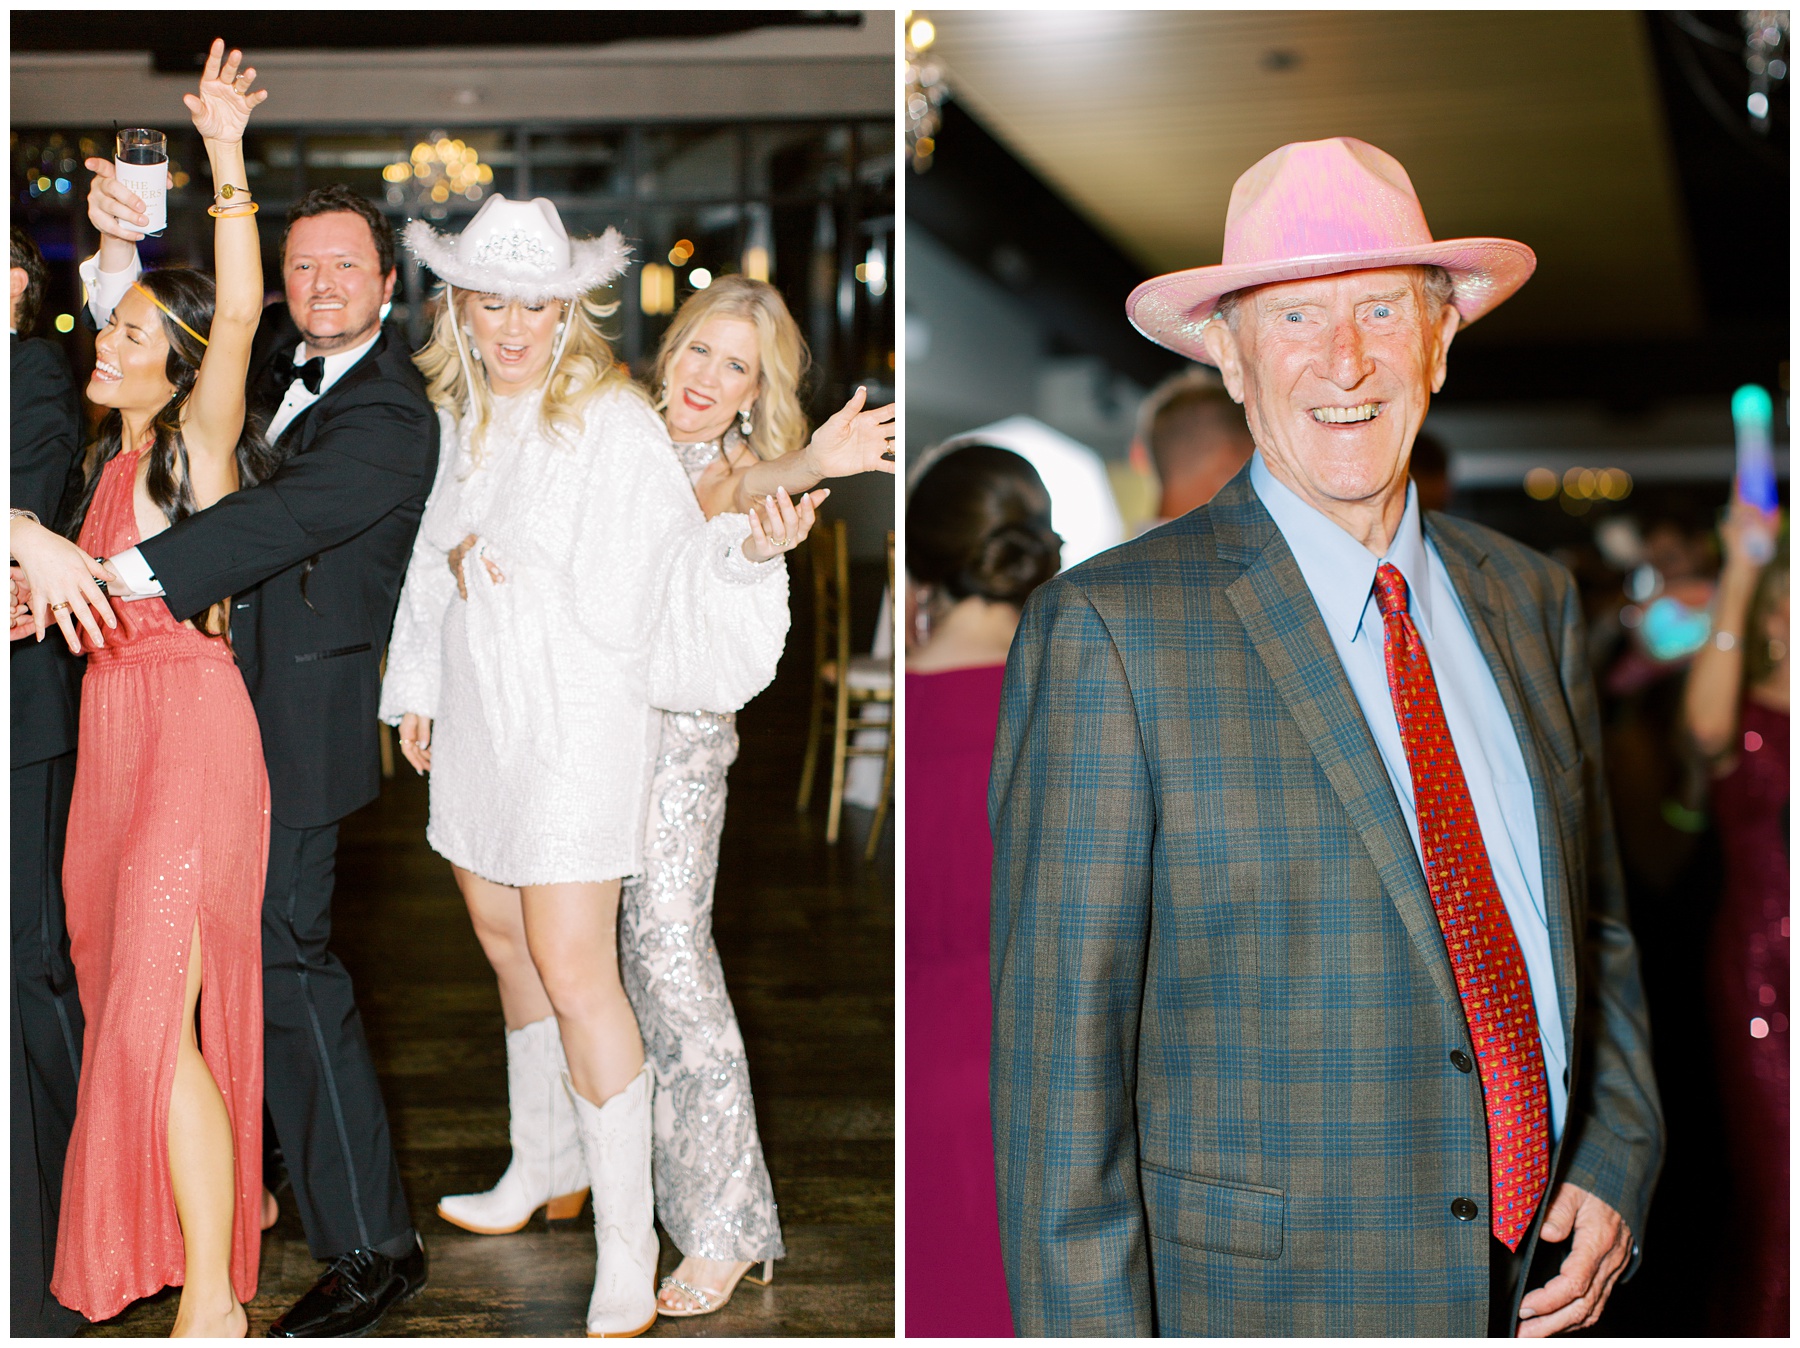 wedding reception guests pose in cowboy hats during NC party 